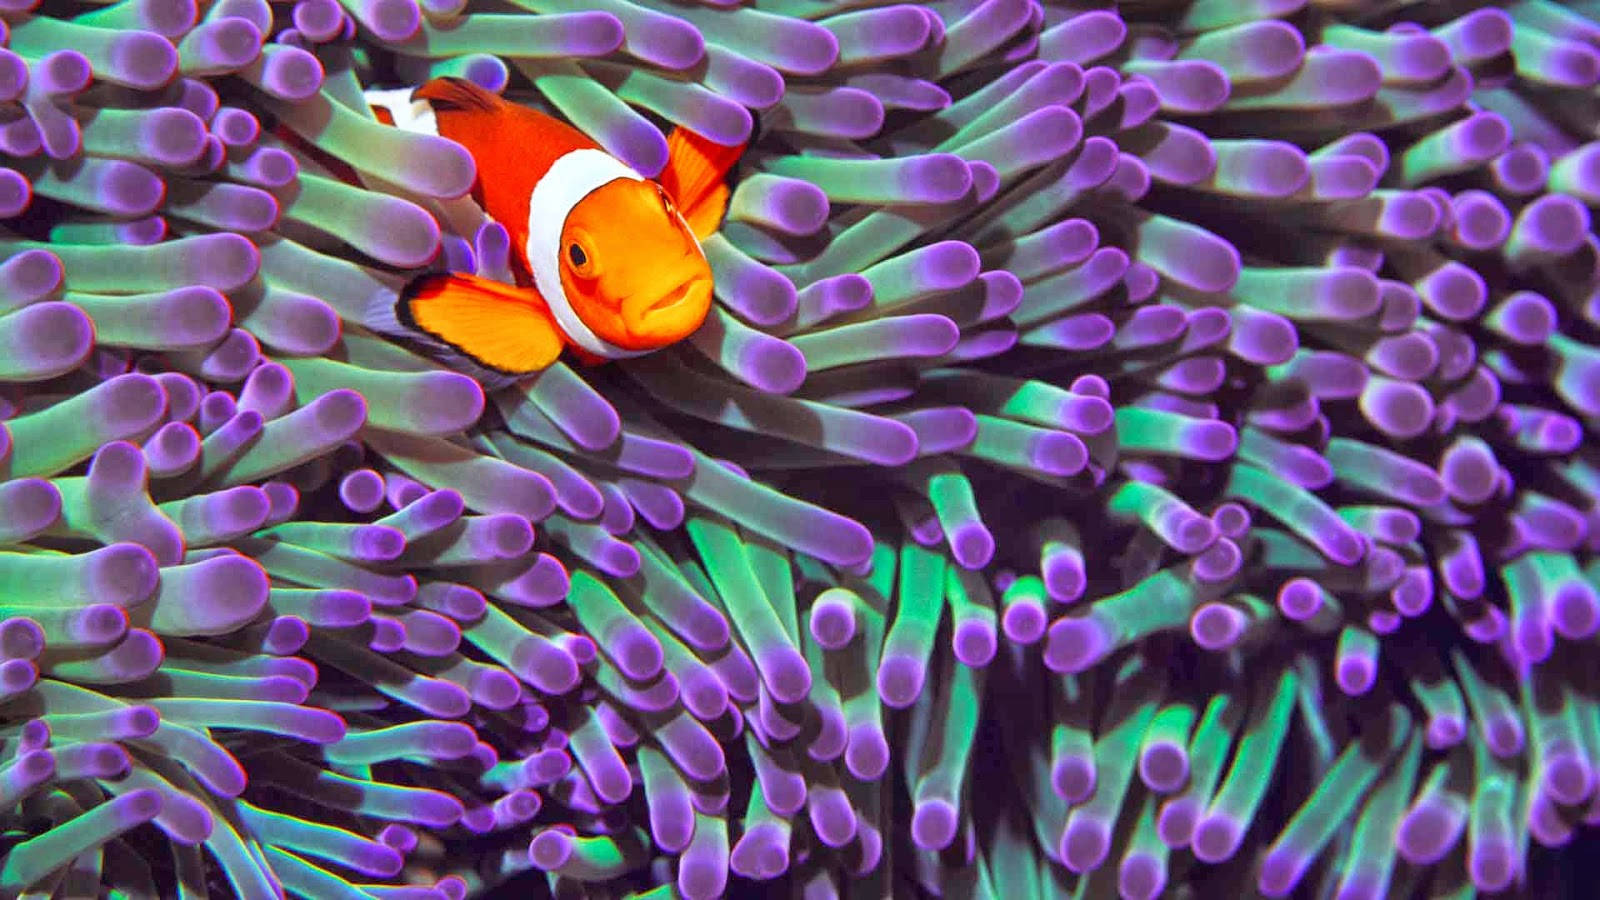 Vibrant Clownfish Amidst Purple Sea Anemone in a Stunning Coral Reef Wallpaper